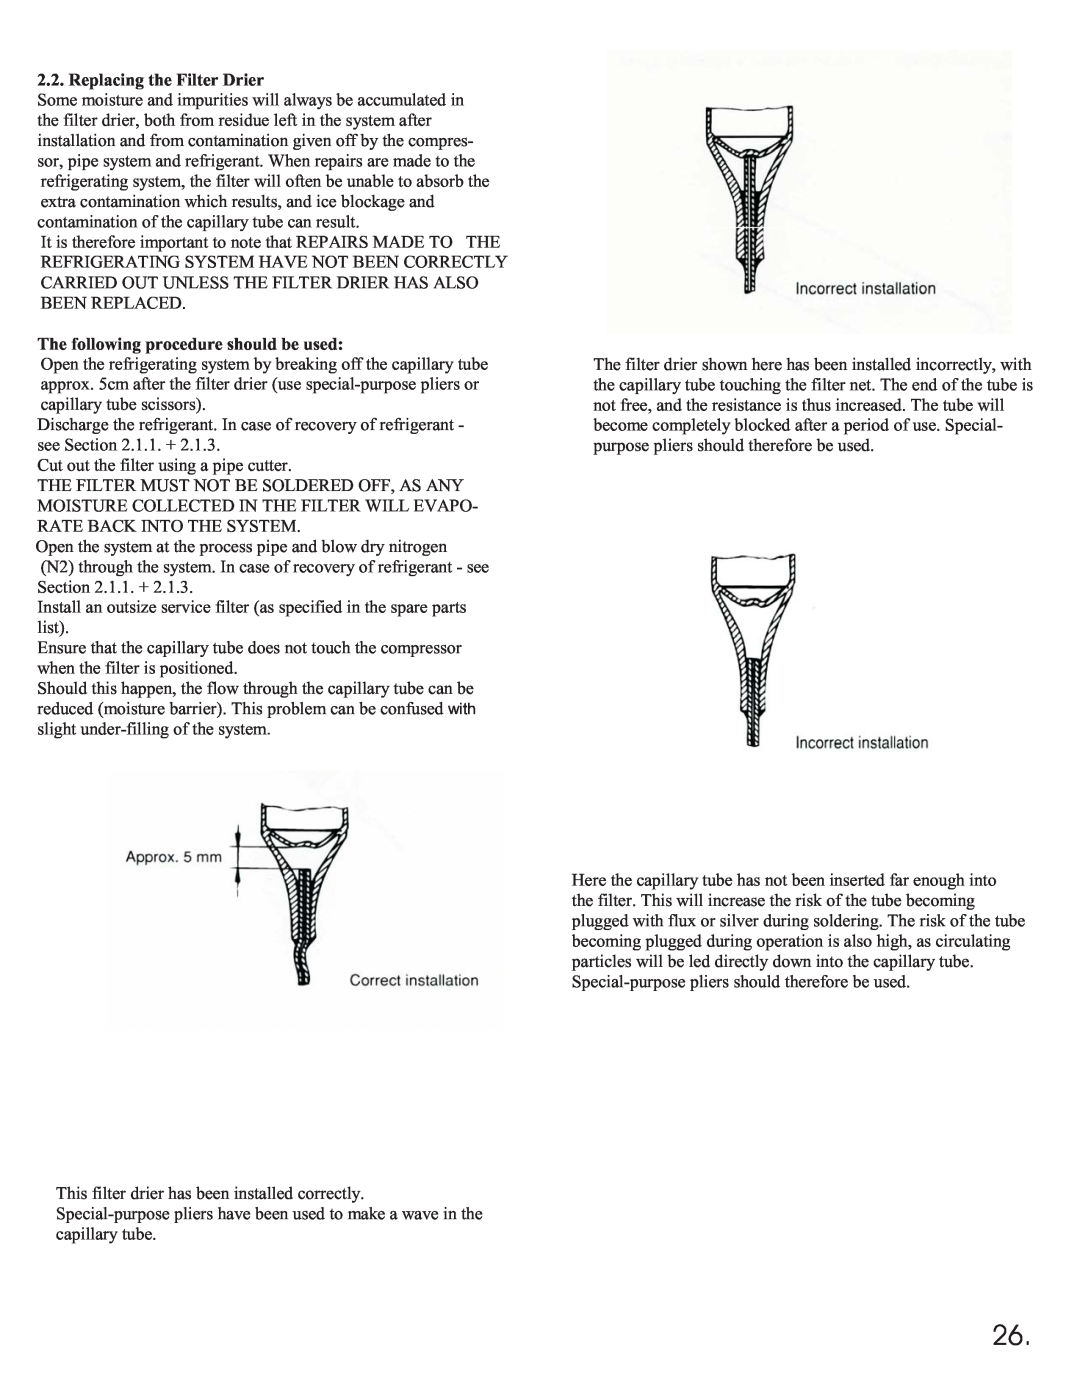 Equator 375 service manual Replacing the Filter Drier, The following procedure should be used 